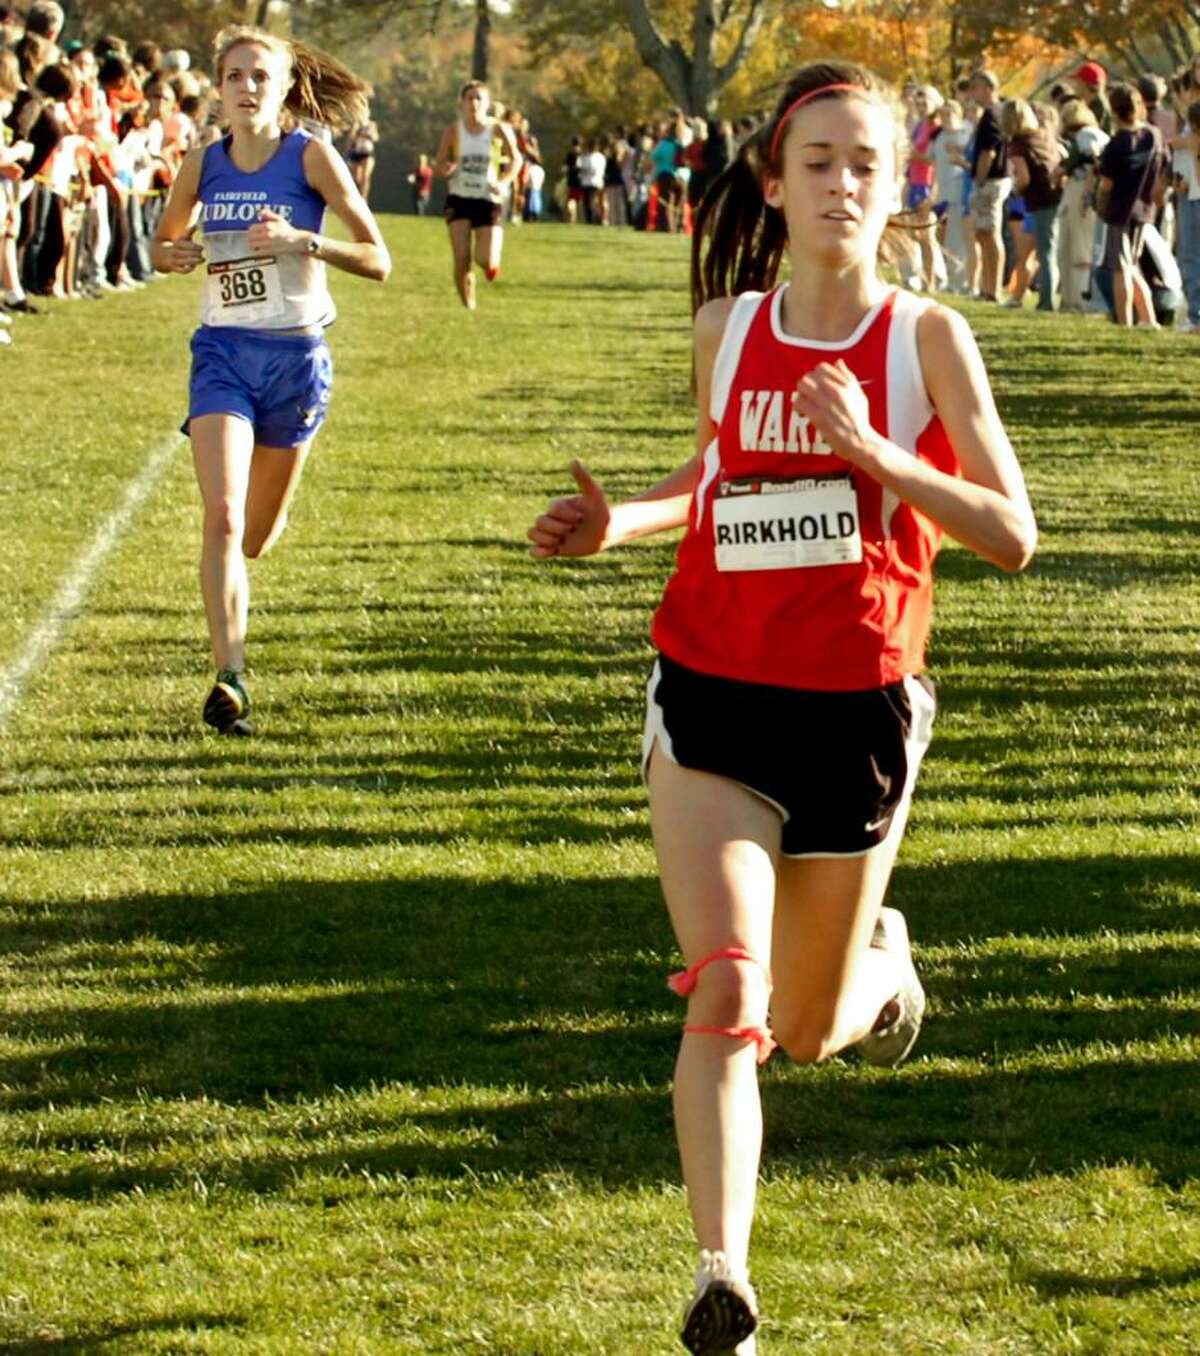 Carly Birkhold, of Warde, fourth in the girls varsity cross country championship race at Waveny Park in New Canaan, on Thursday, Oct.22,2009.